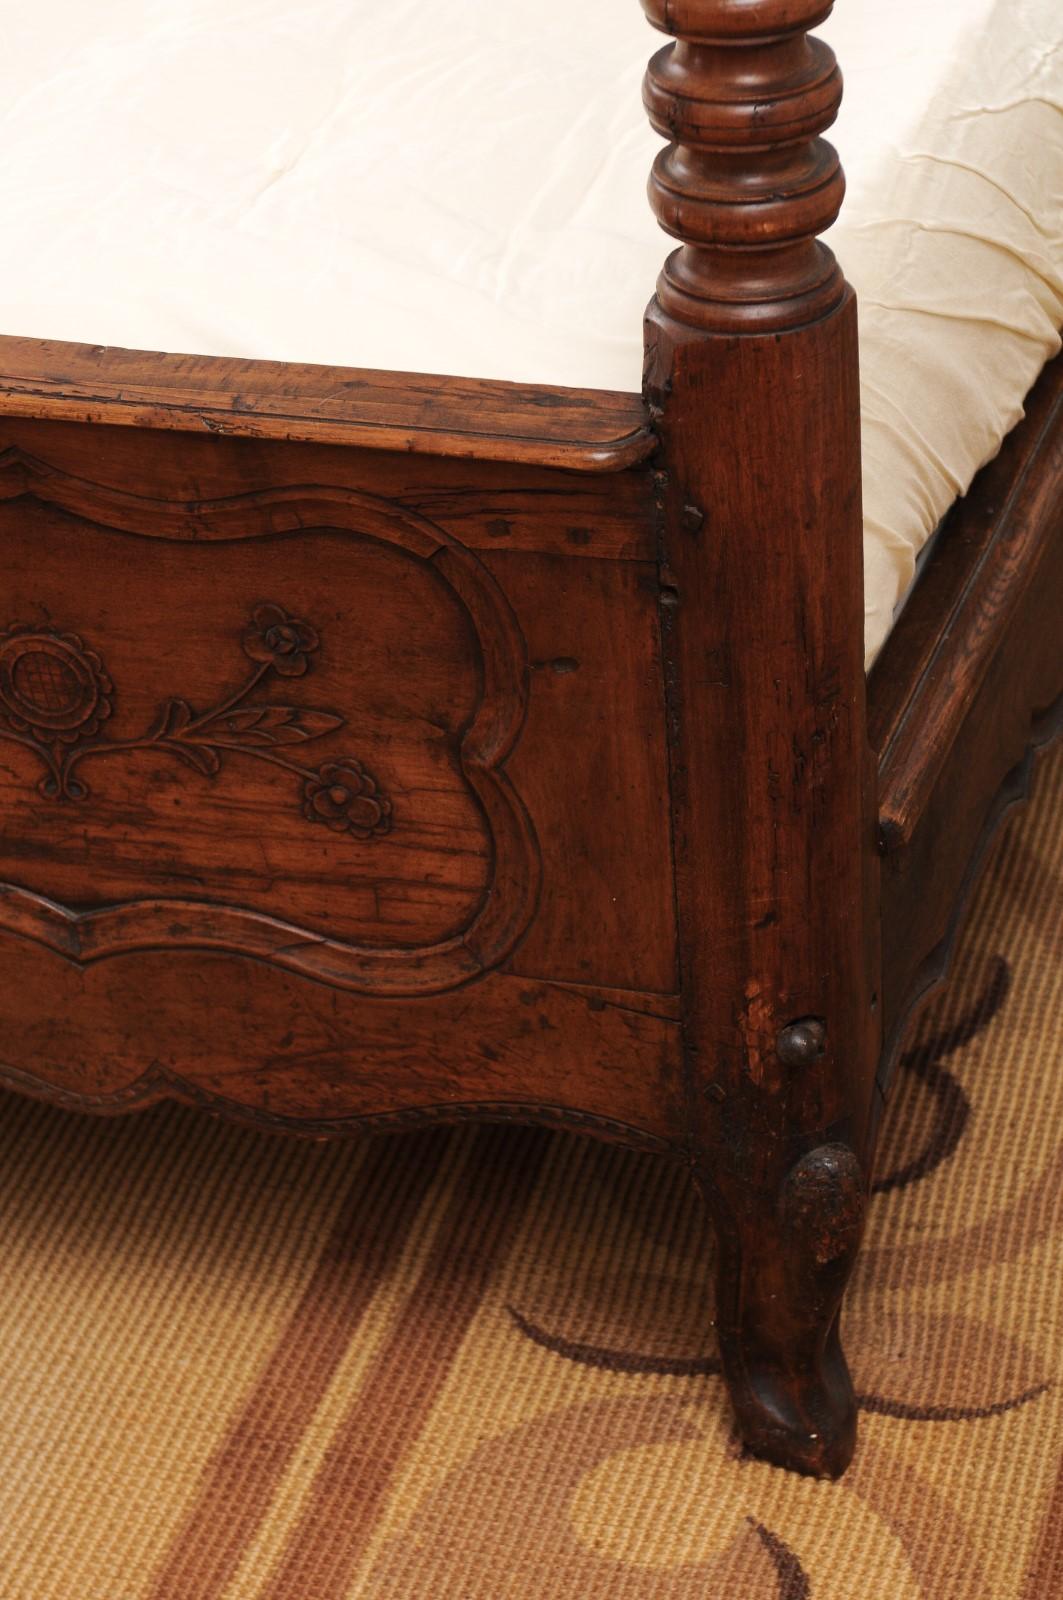 French 1870s Napoléon III Period Walnut Bed with Low-Relief Carved Floral Décor 2